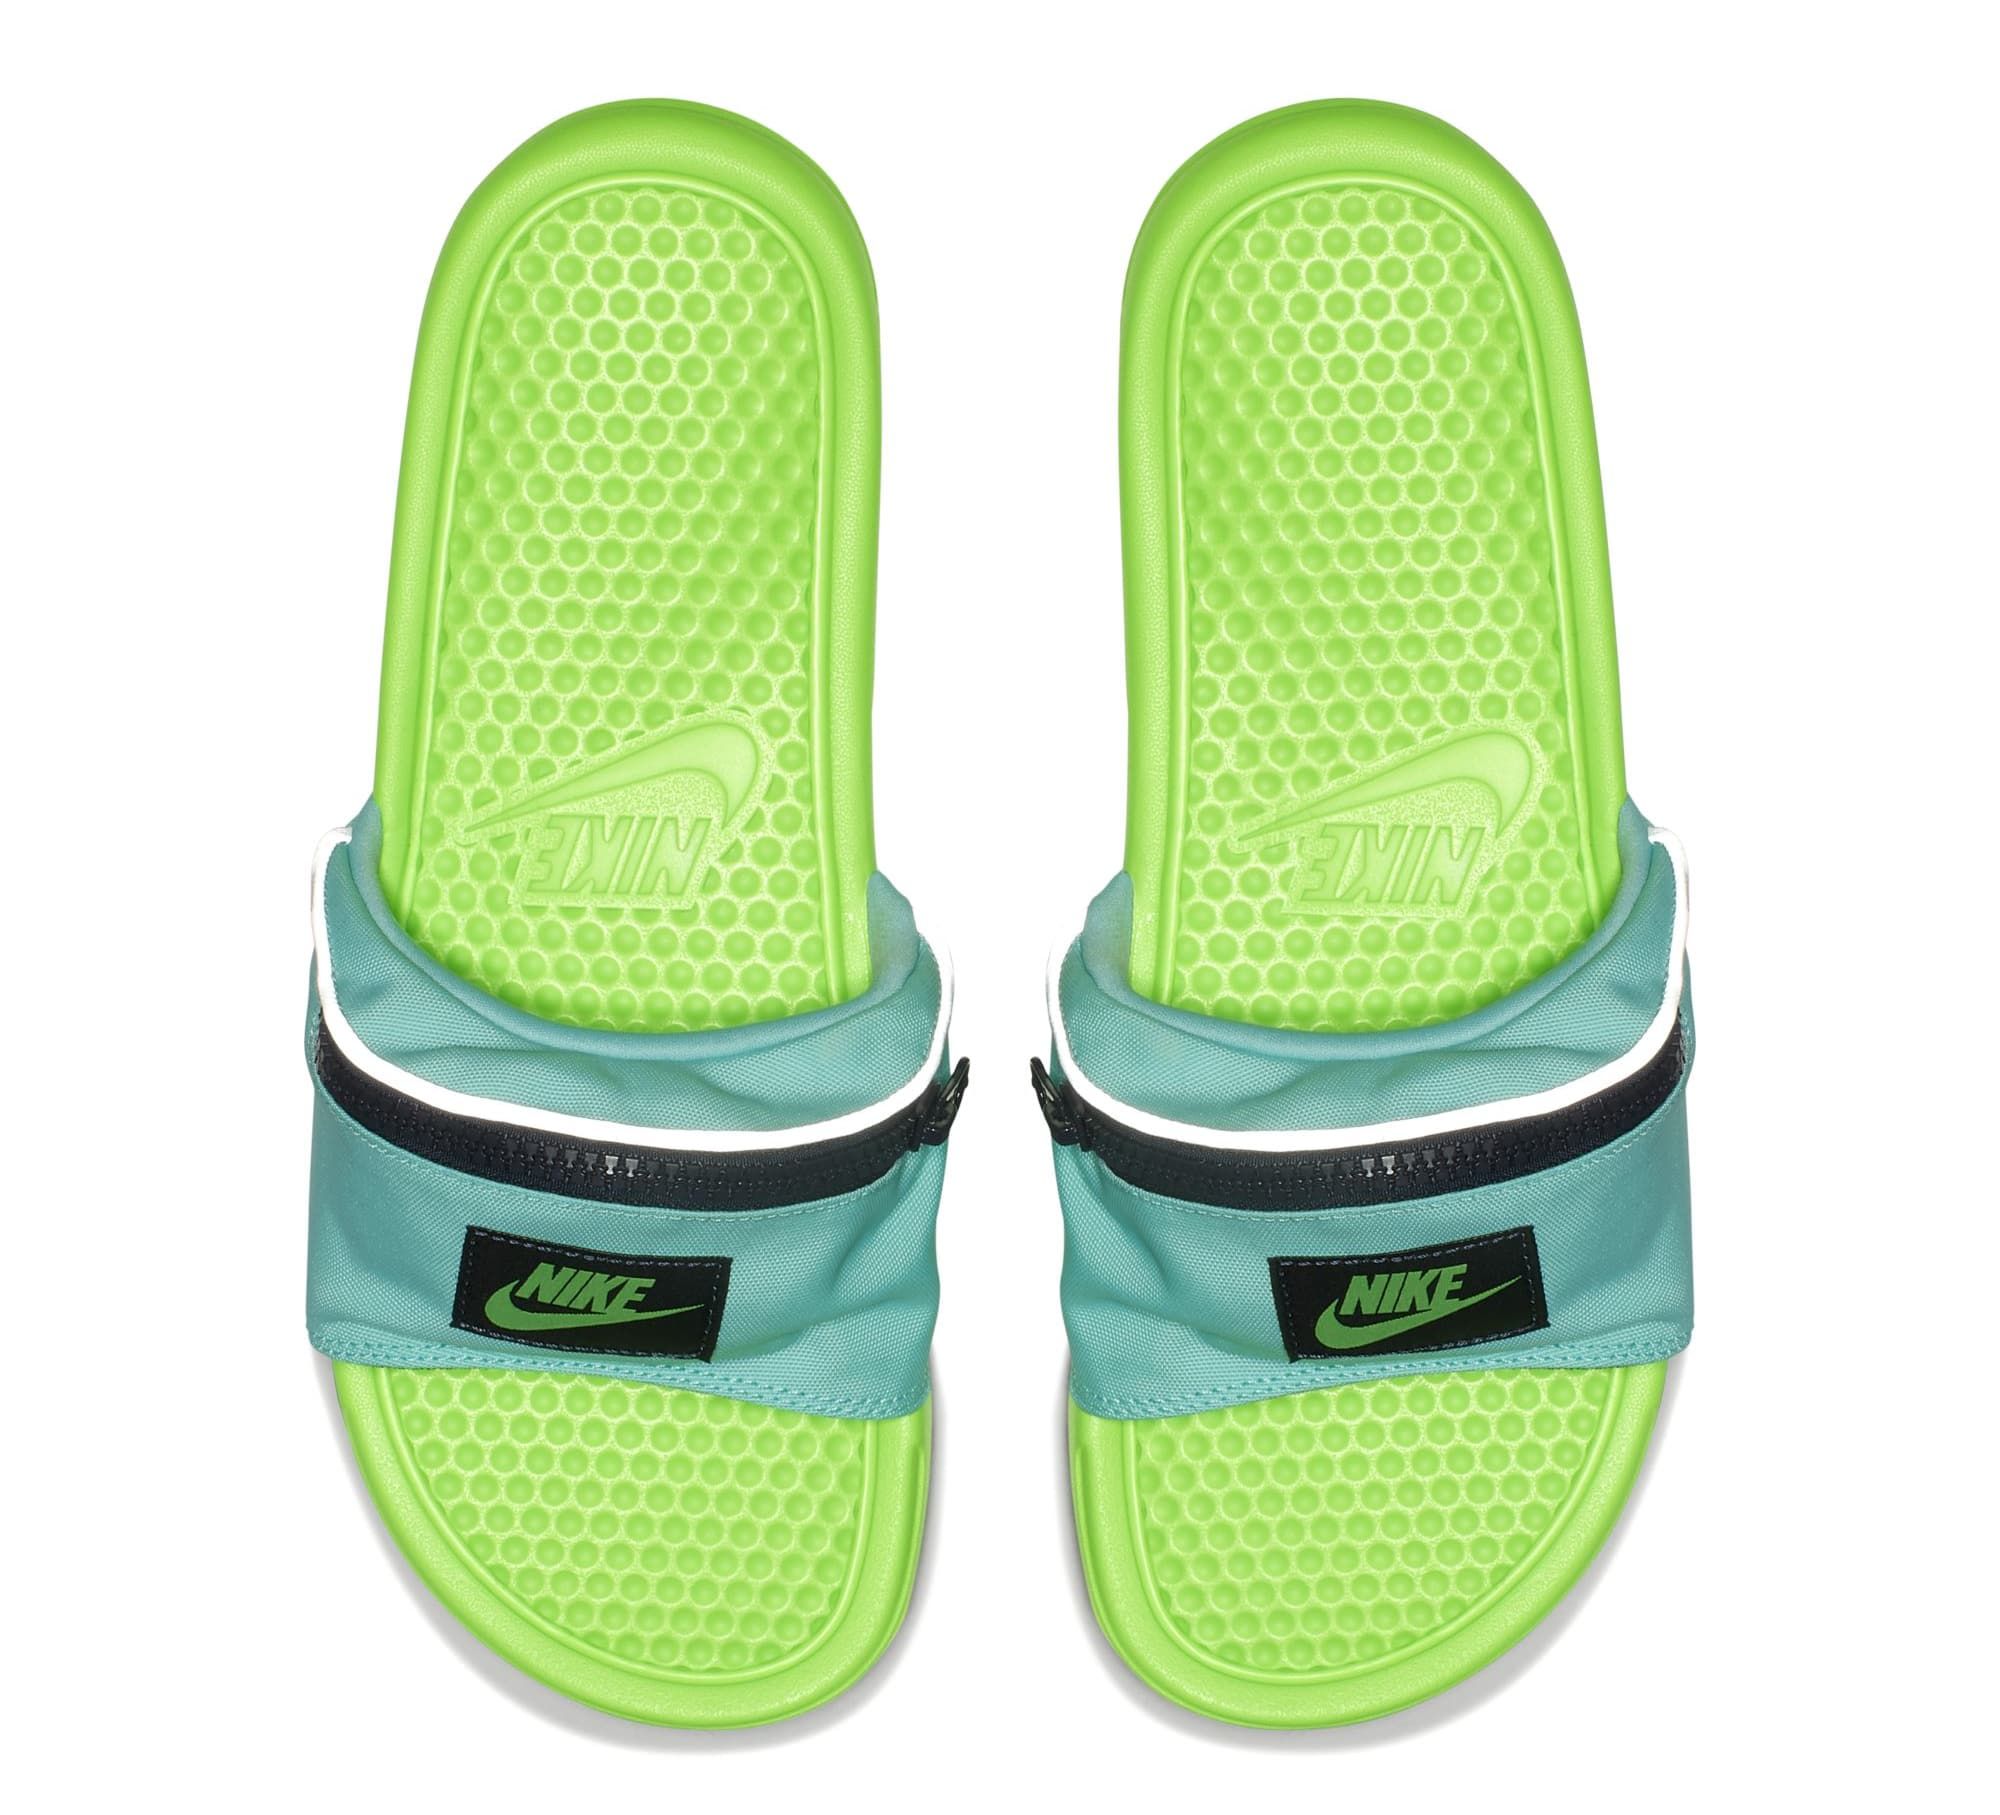 nike sandals with zipper pocket